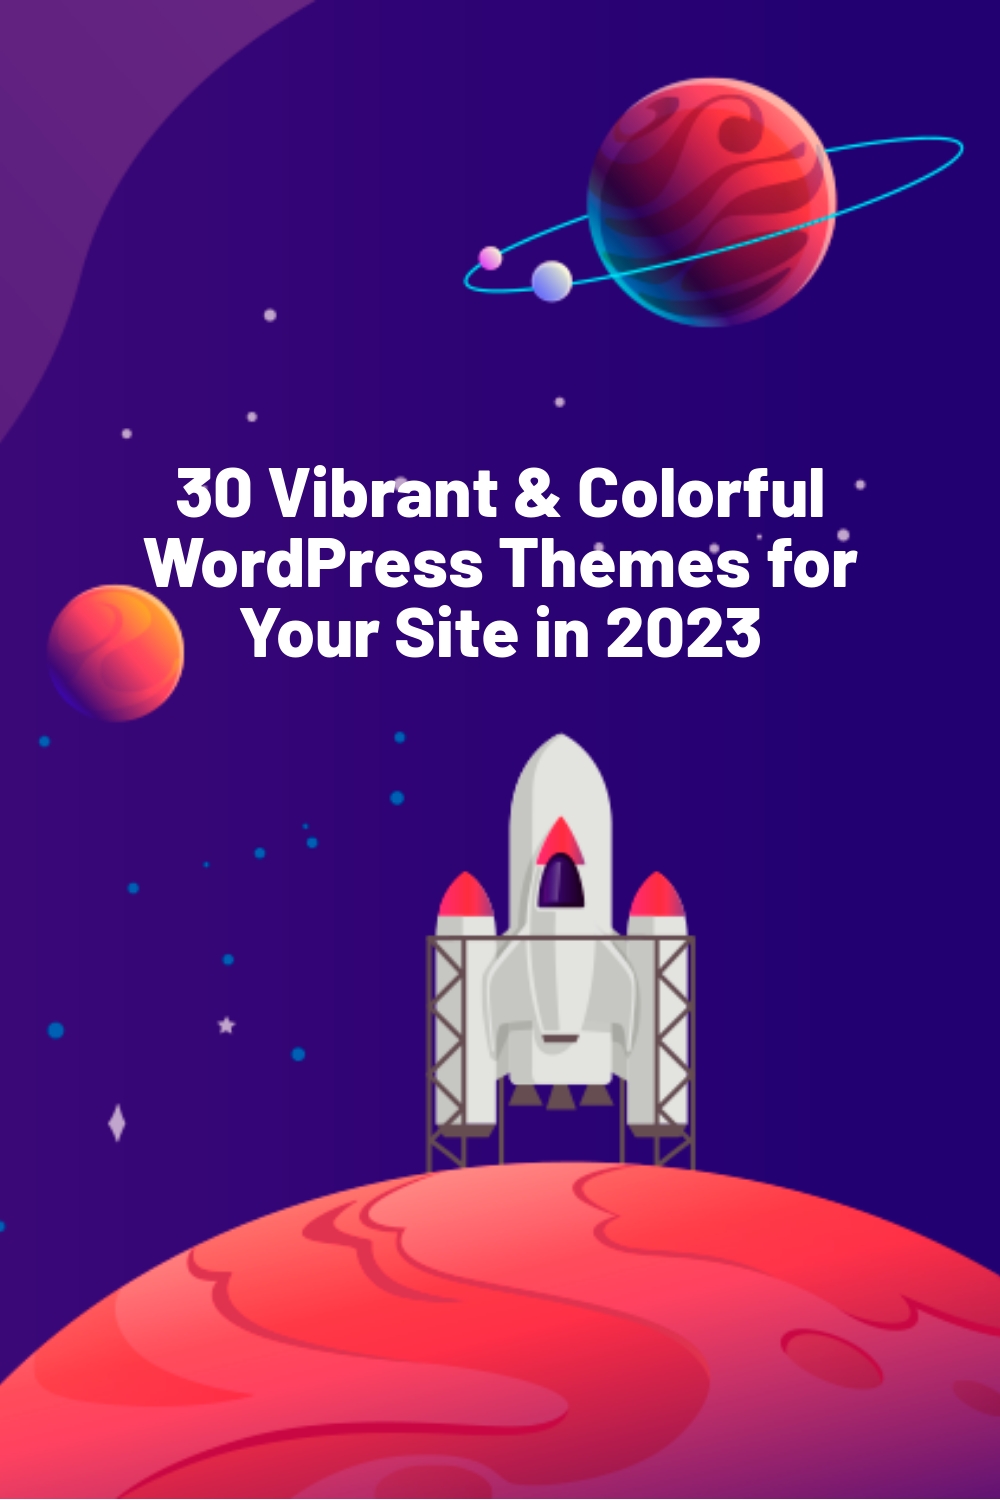 30 Vibrant & Colorful WordPress Themes for Your Site in 2023